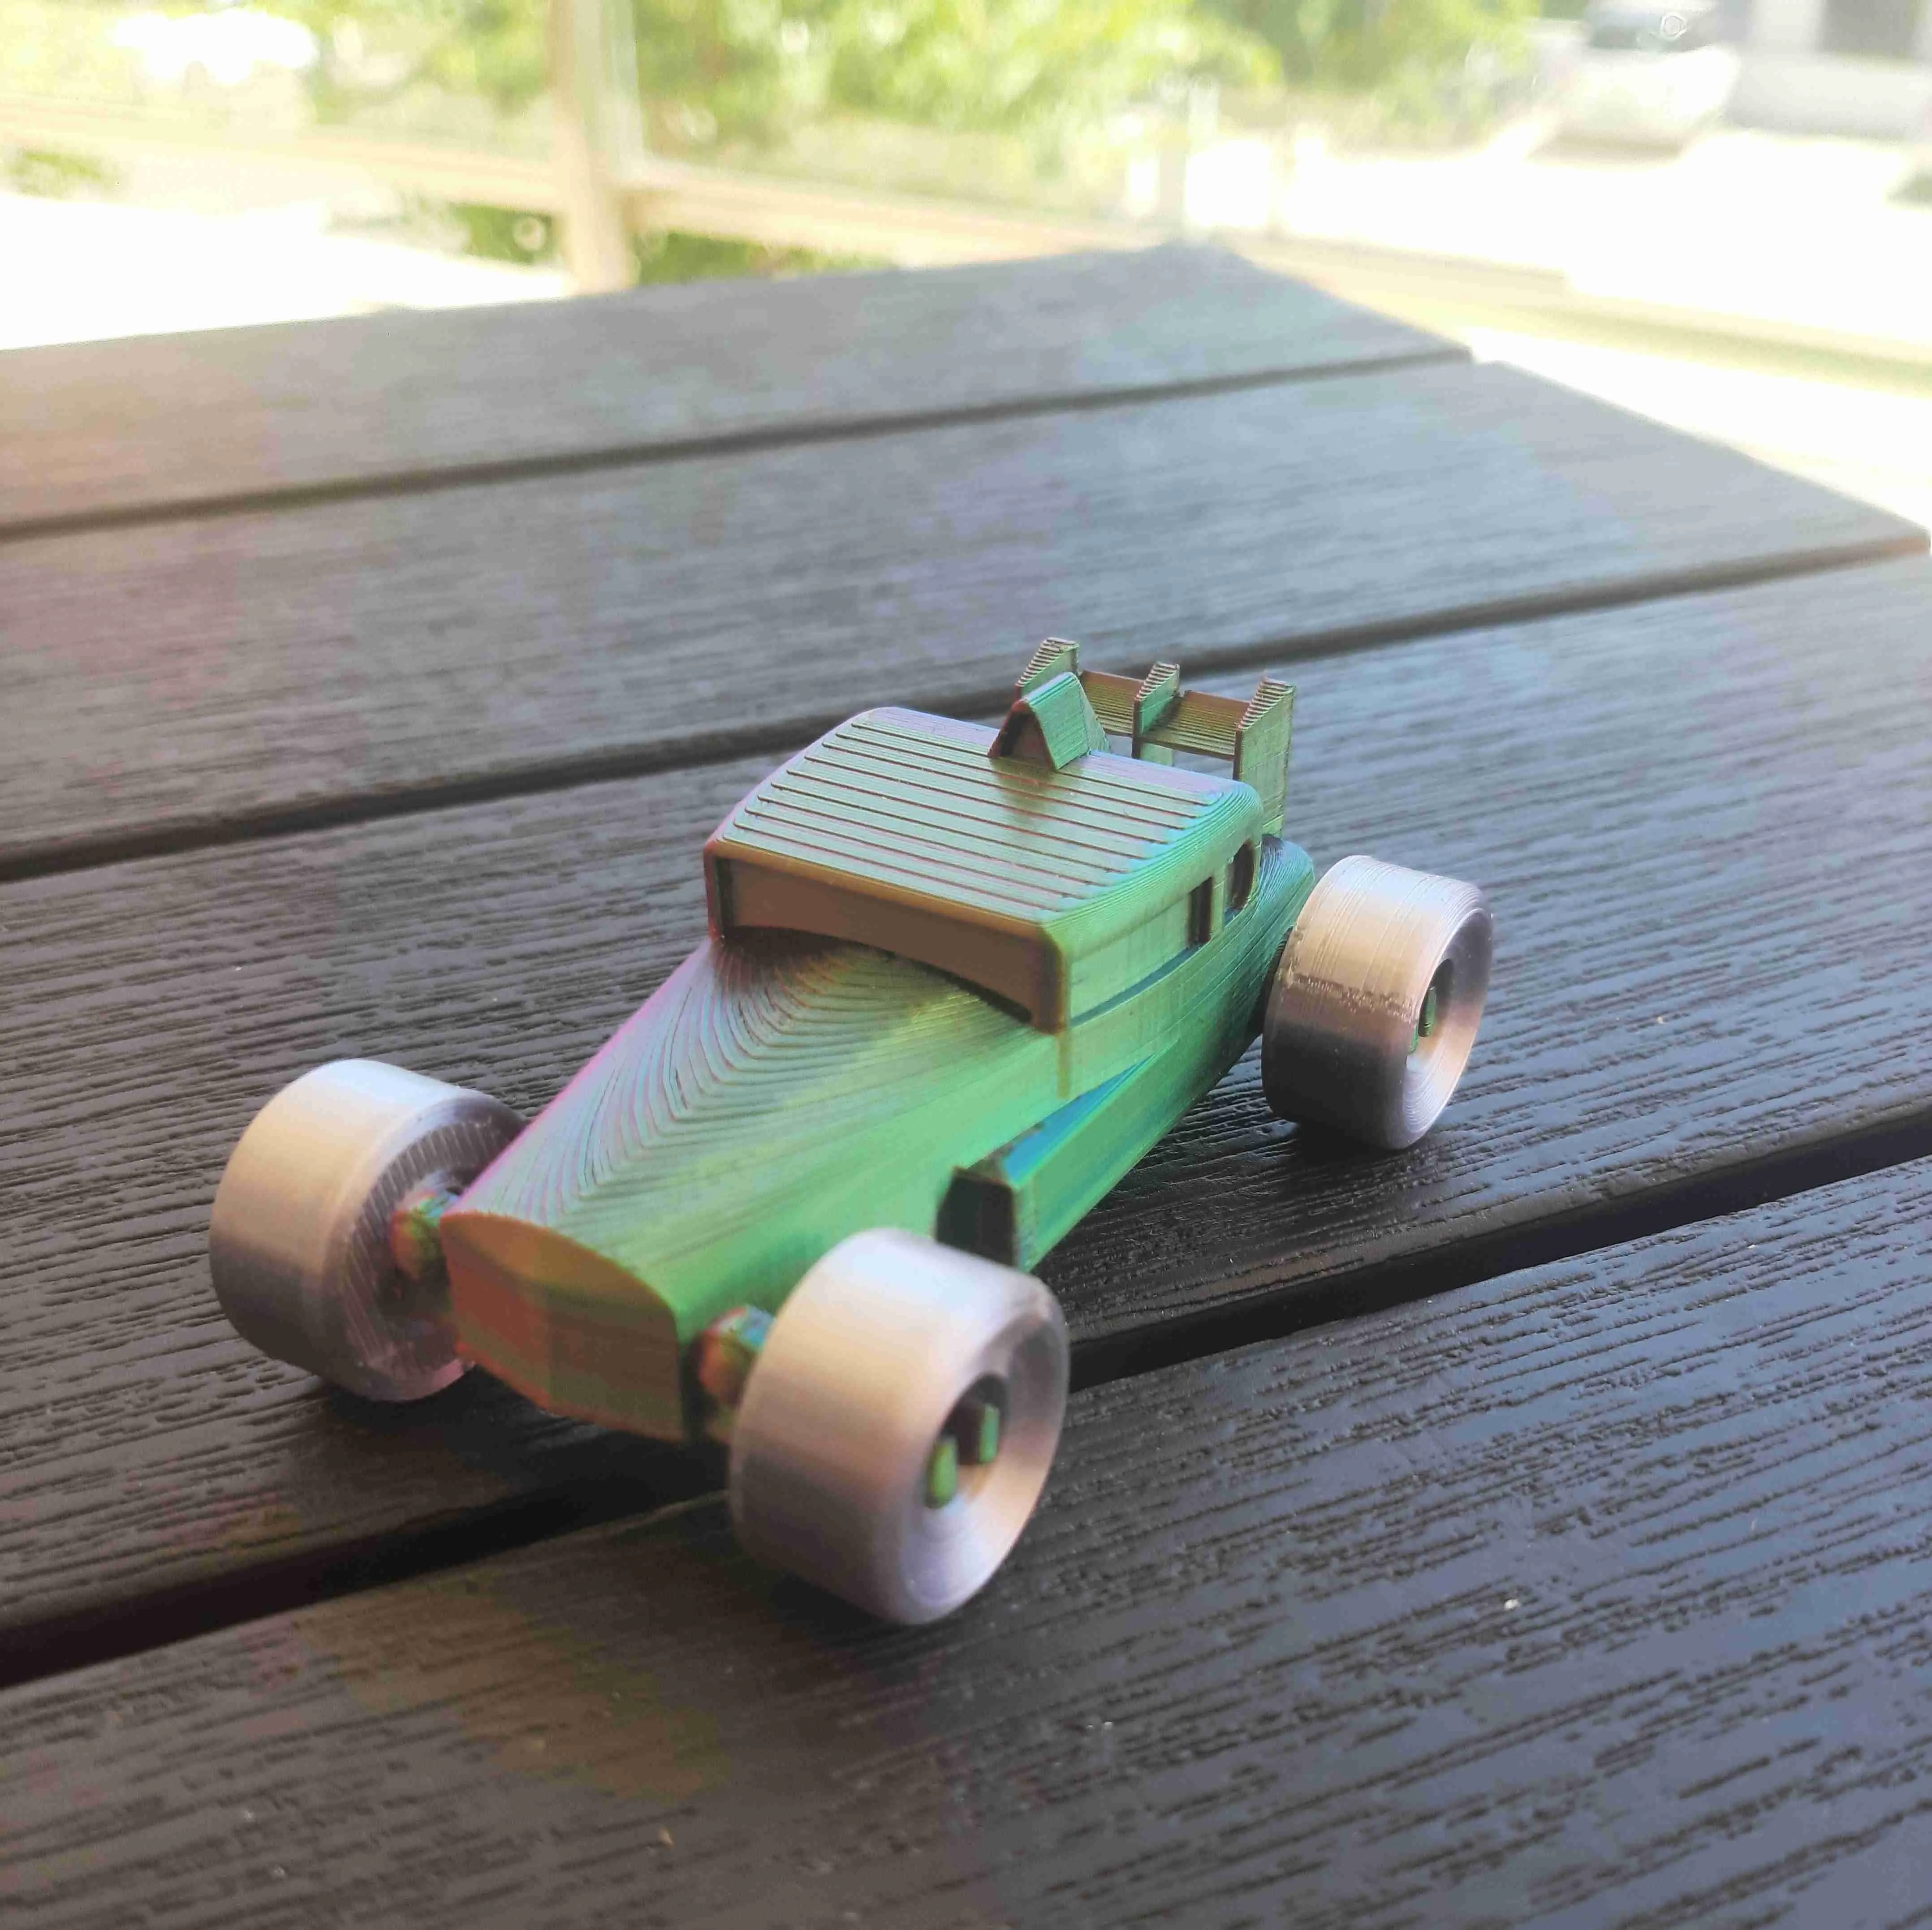 Mini F1 Hot rod #002  (PRINT IN PLACE, NO SUPPORT)